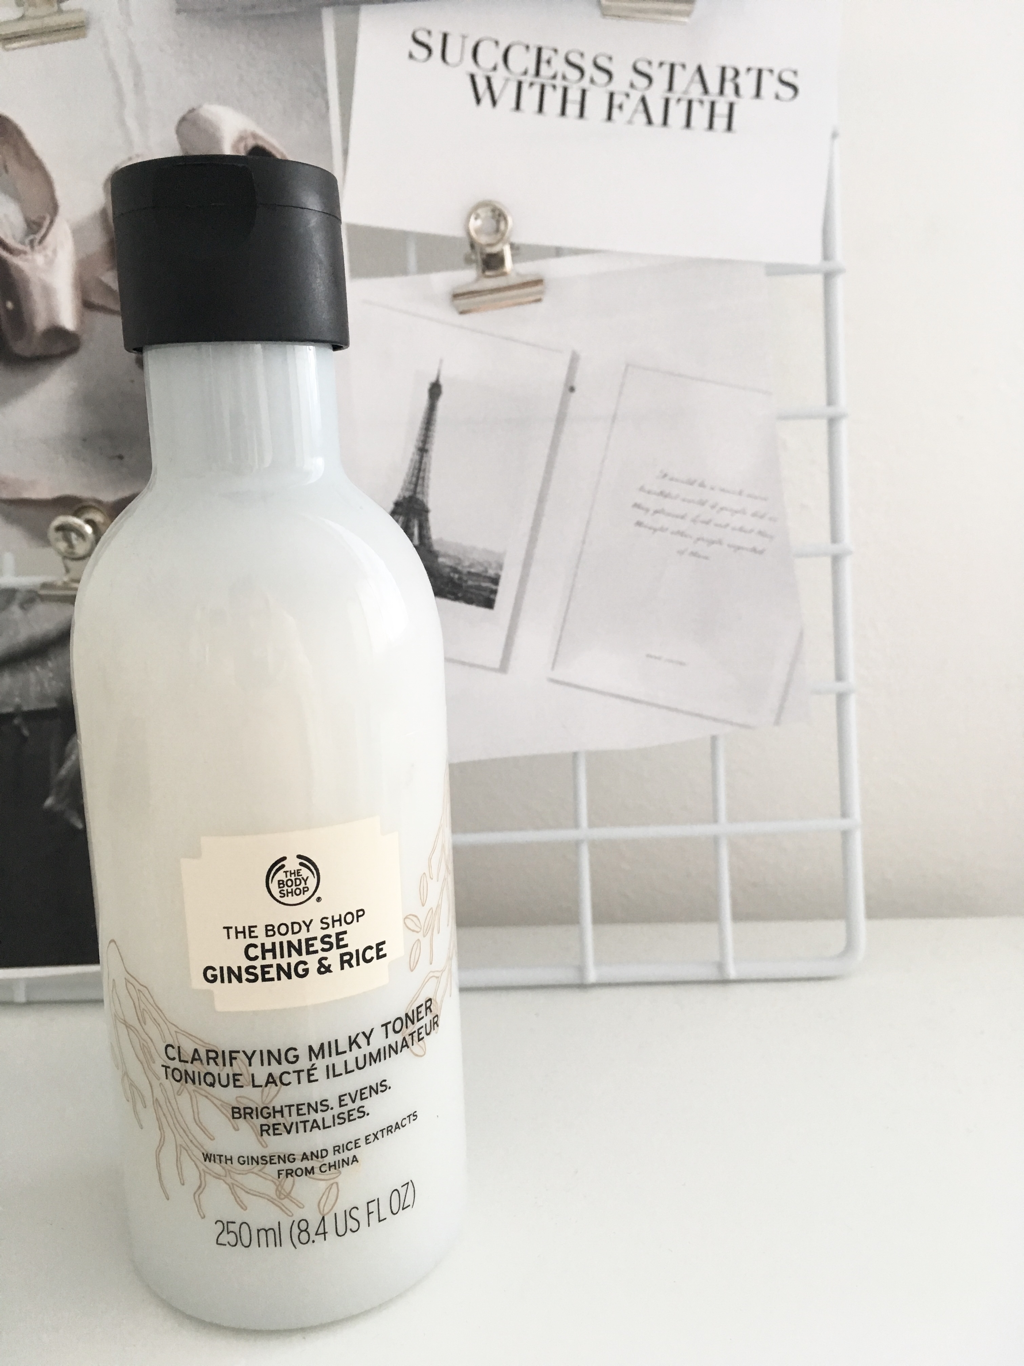 The body shop gingsEnG & rice toner review -